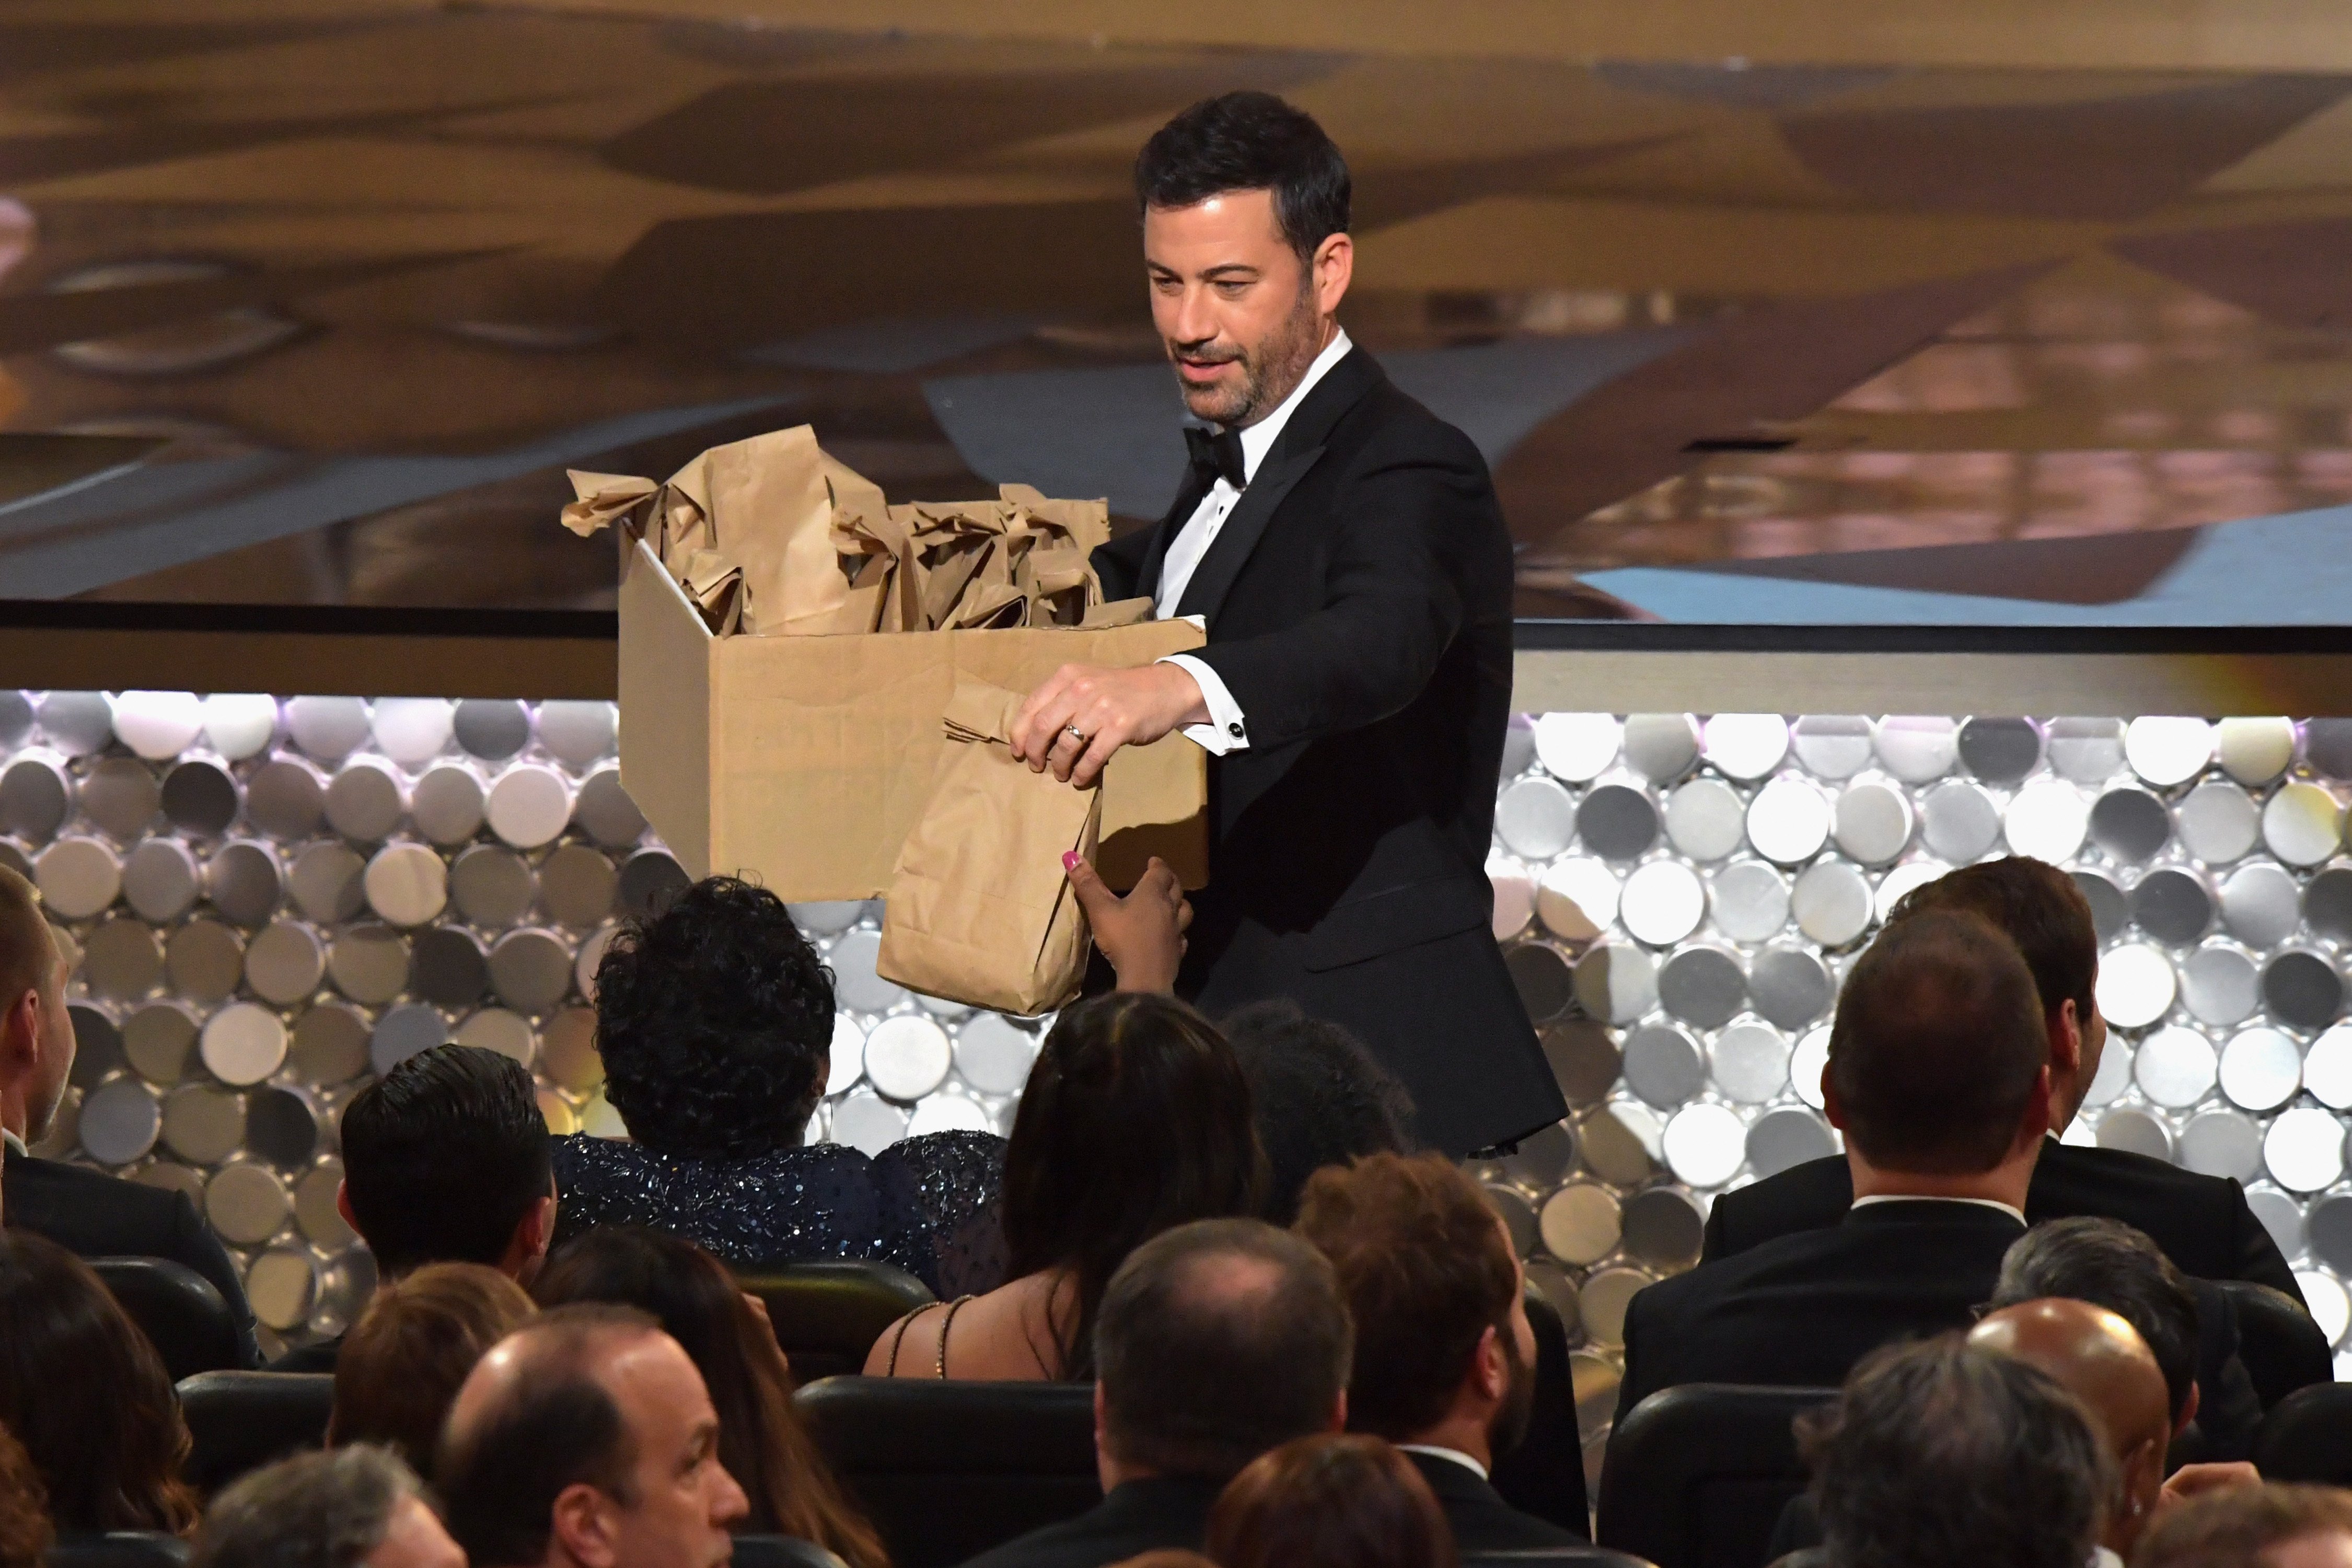 Host Jimmy Kimmel distributes snacks during the 68th Annual Primetime Emmy Awards at Microsoft Theater on September 18, 2016 in Los Angeles